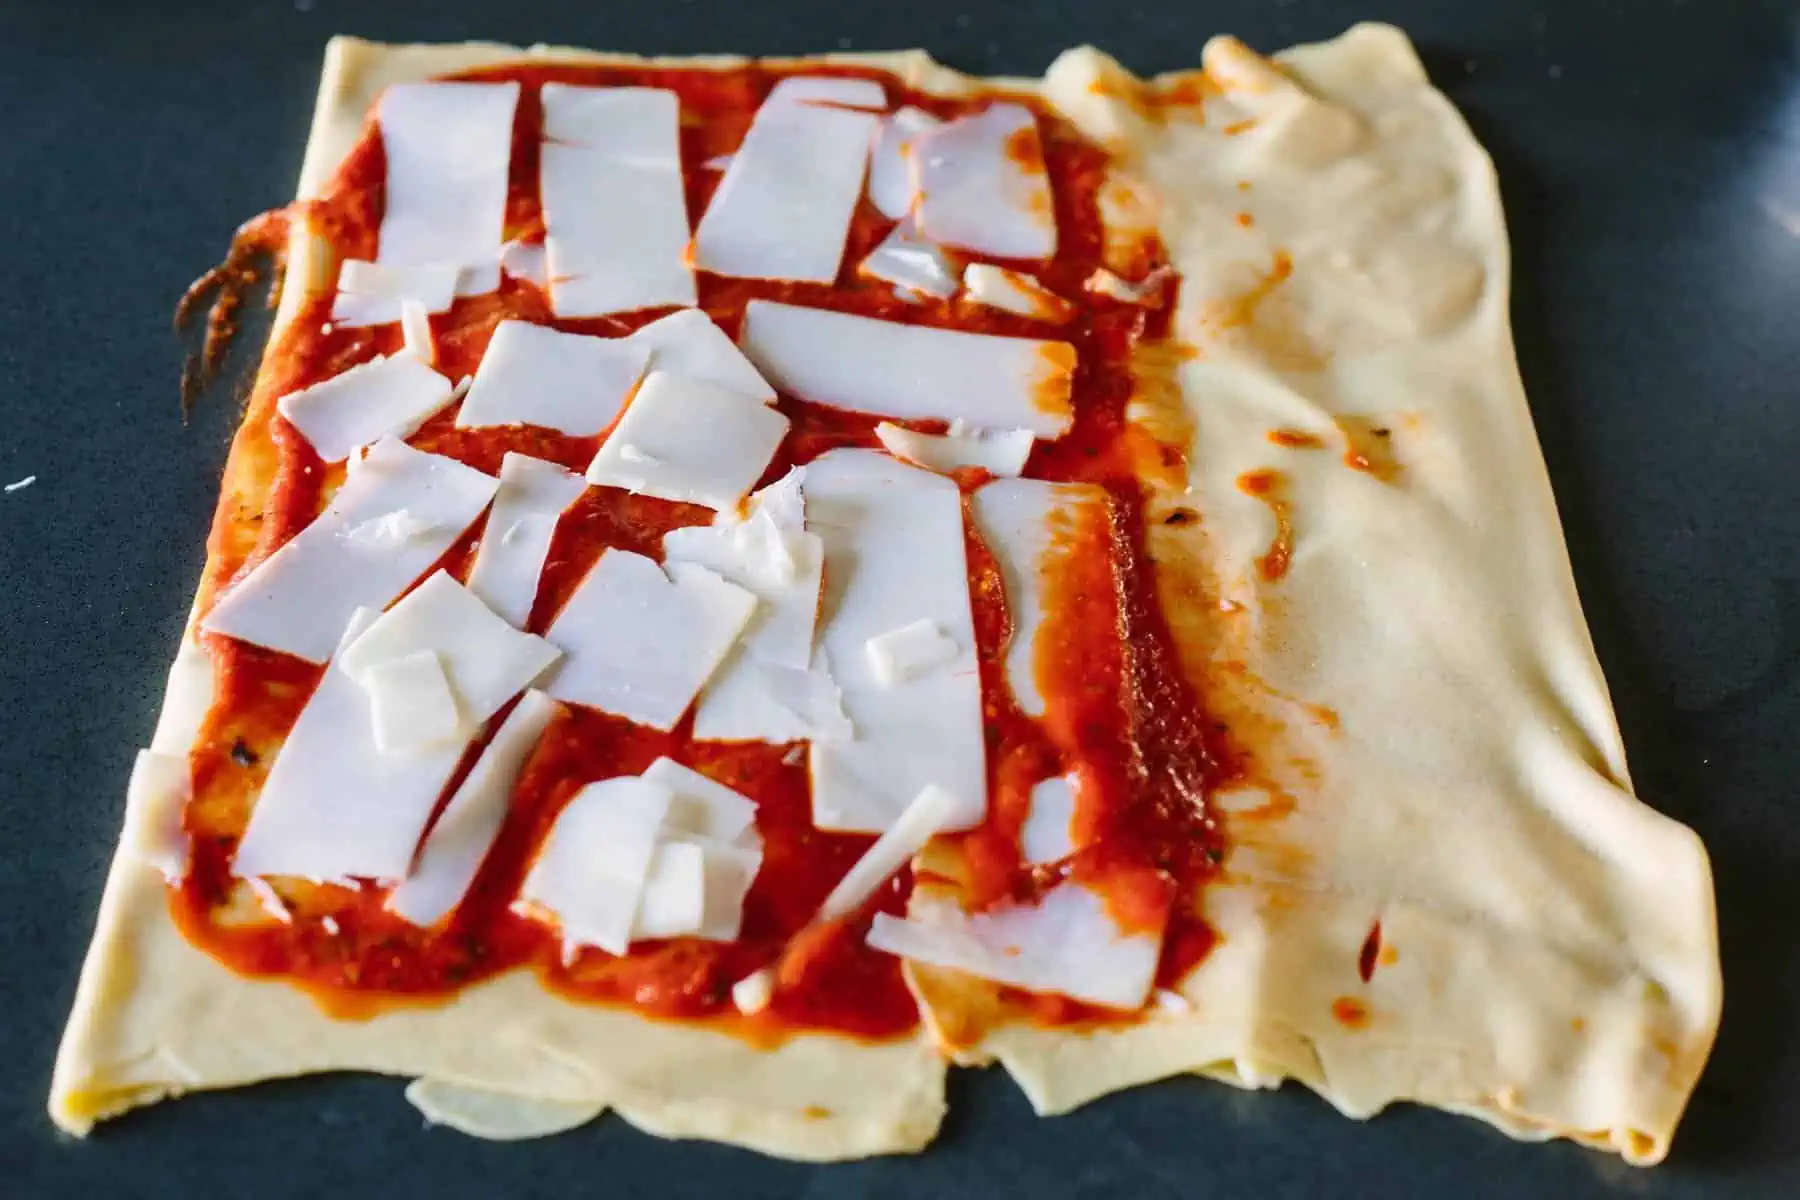 Folding bread dough over layers of cheese and pizza sauce.